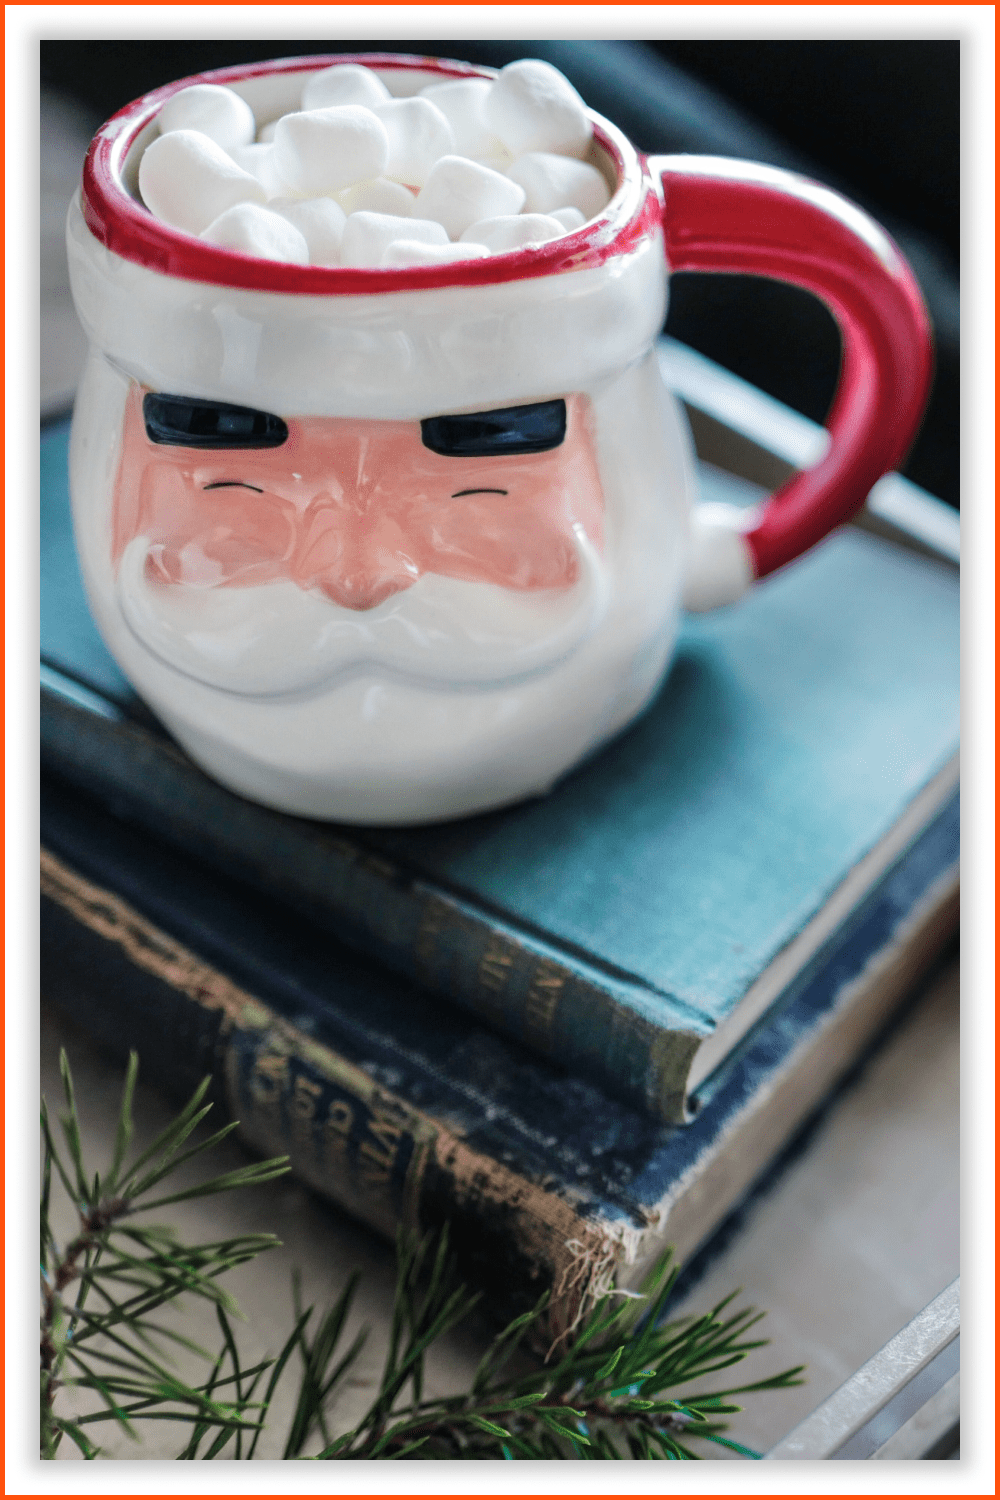 A big cup with Santa Claus's face is sitting on the books.